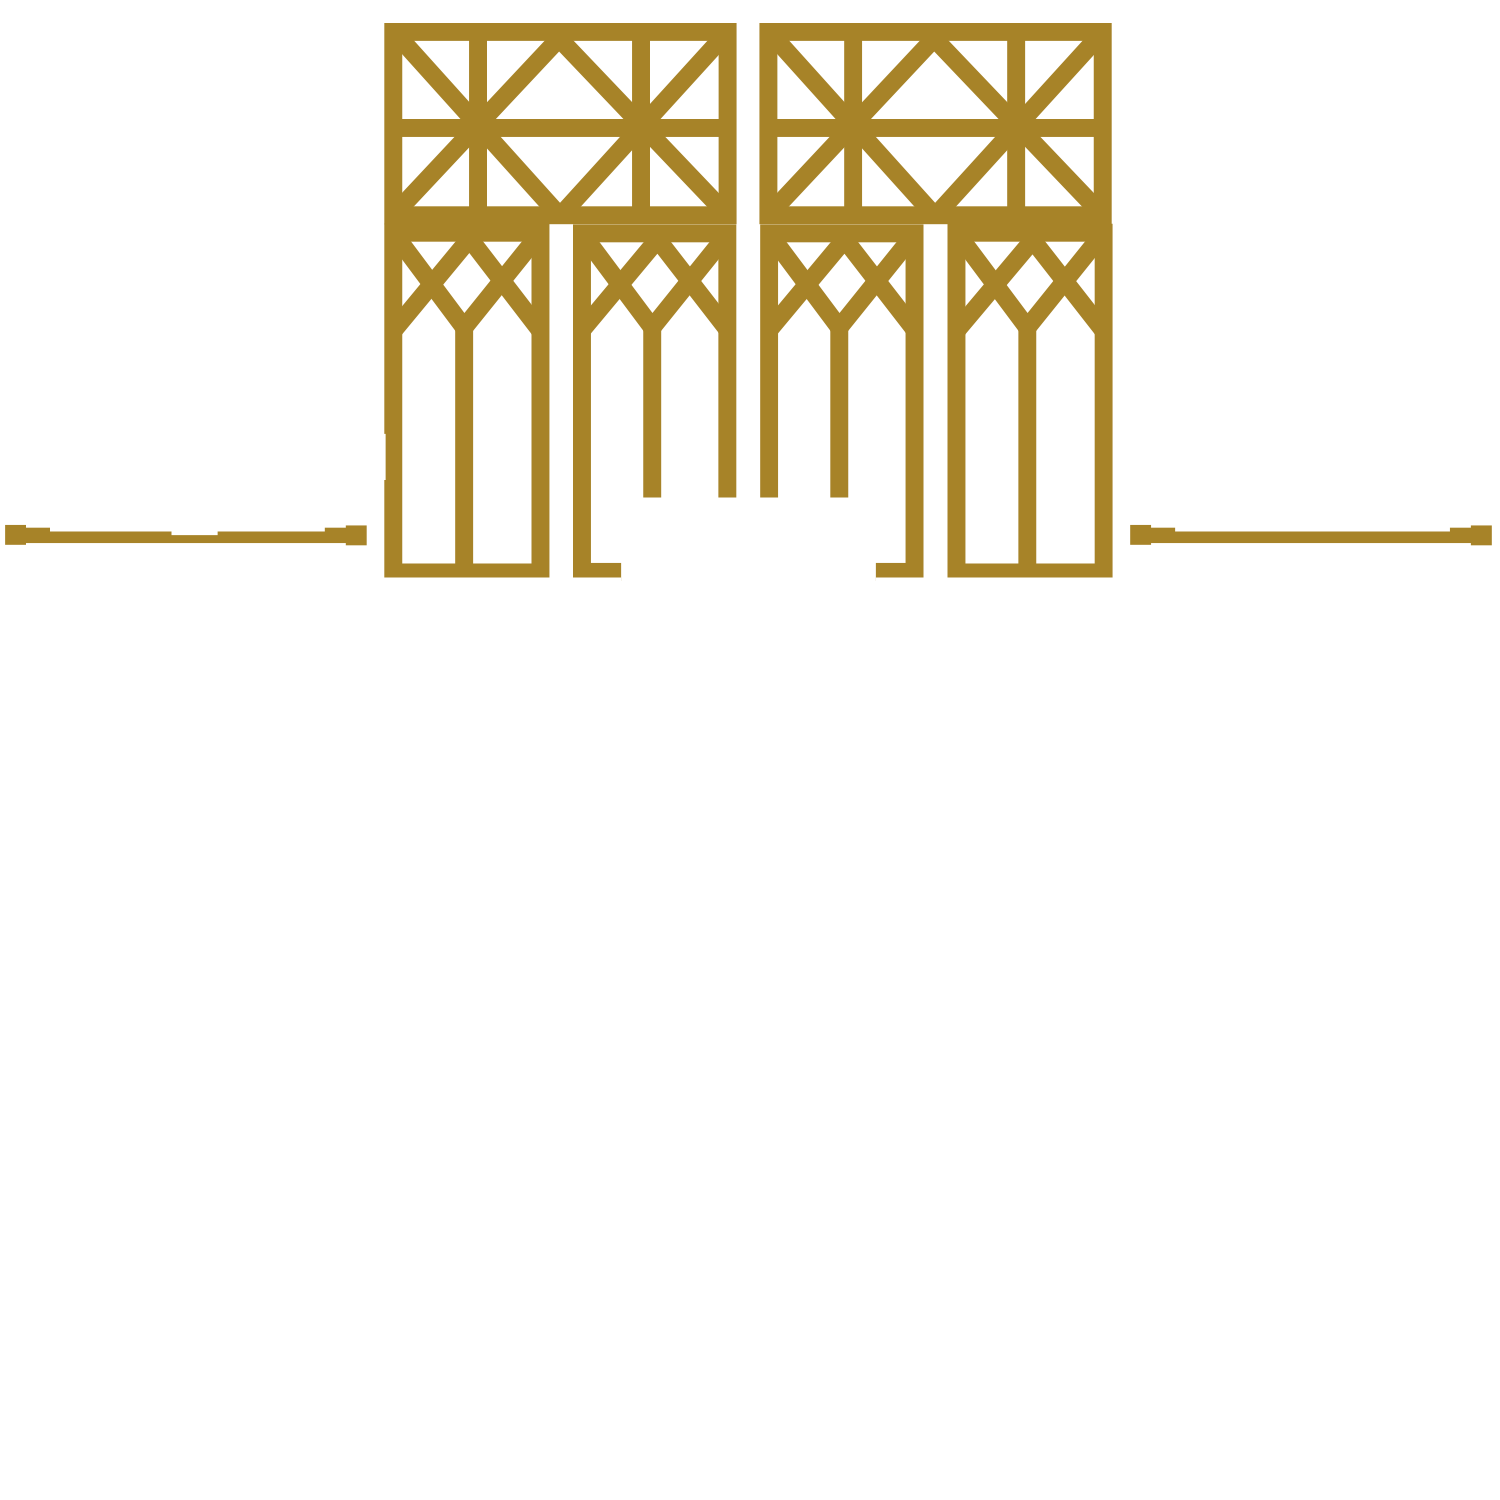 THE HISTORIC VICTORY THEATER